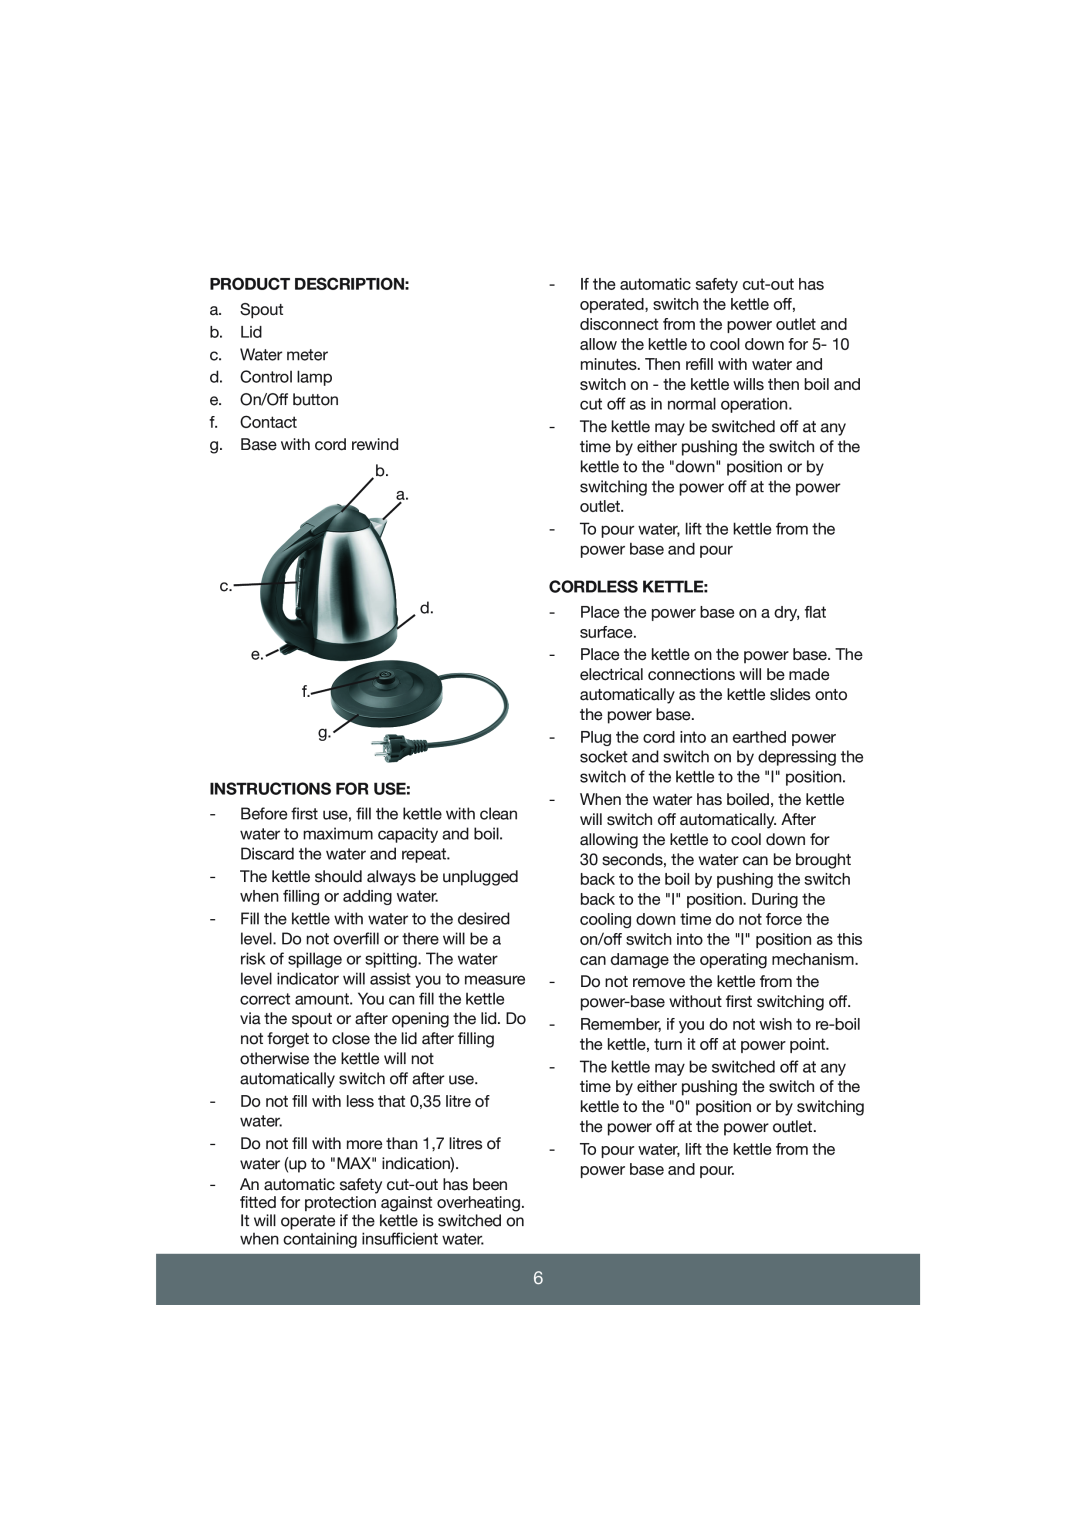 Melissa 645-055 manual Product Description, Instructions For Use, Cordless Kettle 